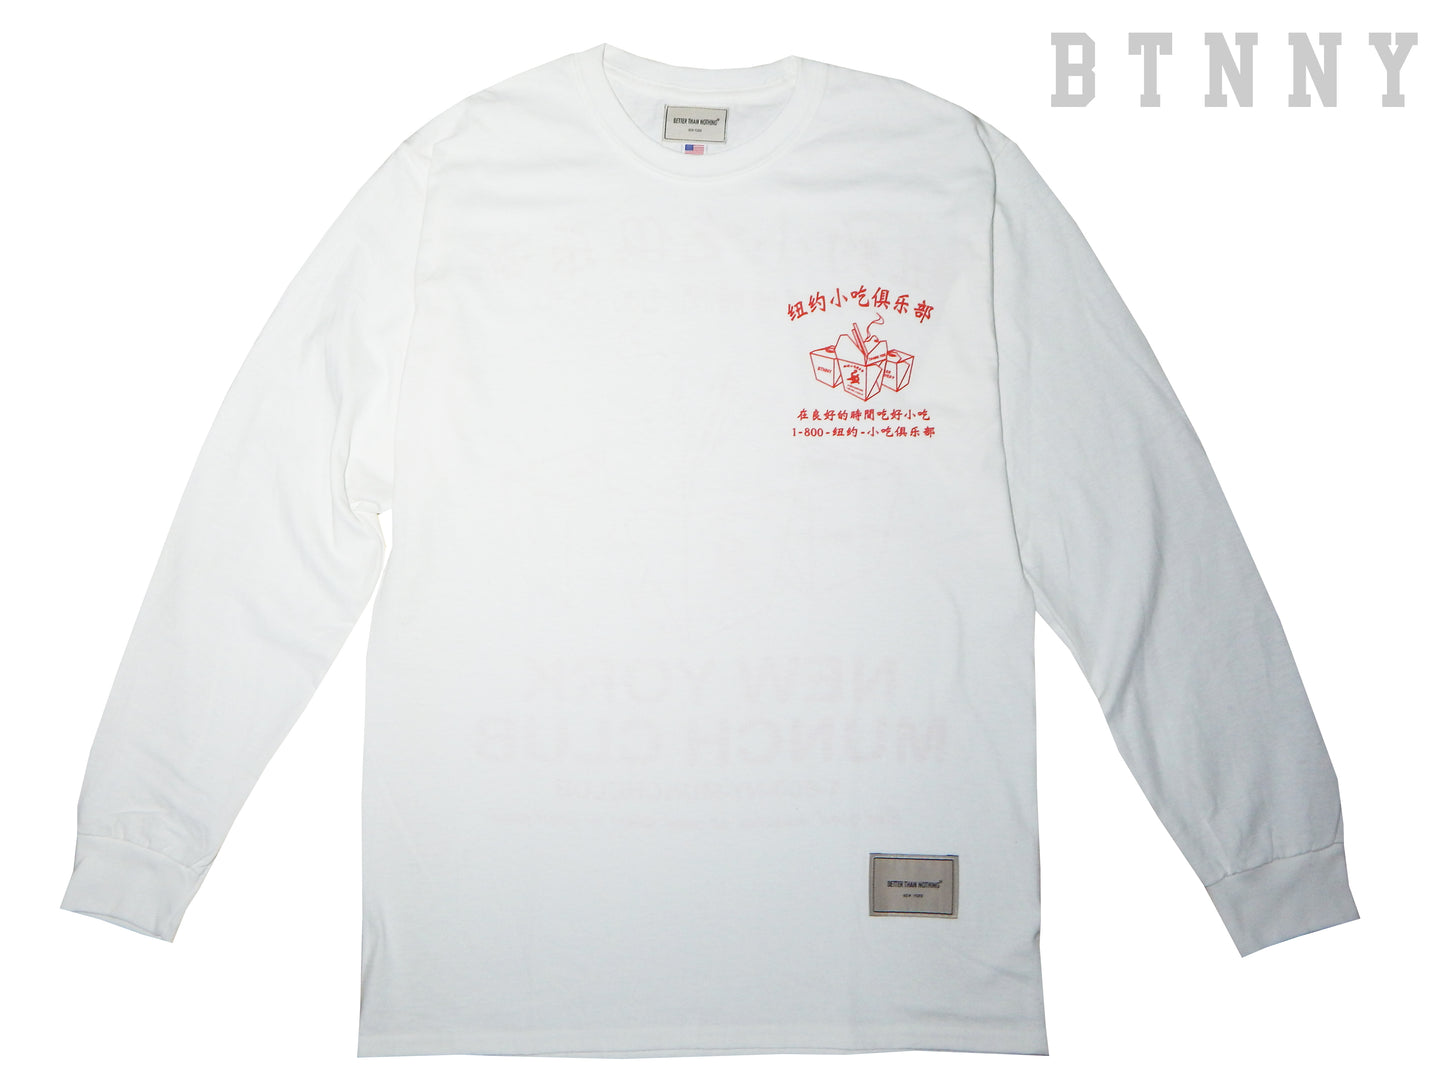 NY MUNCH CLUB (CHINESE DELIVERY BOX) L/S T-Shirts